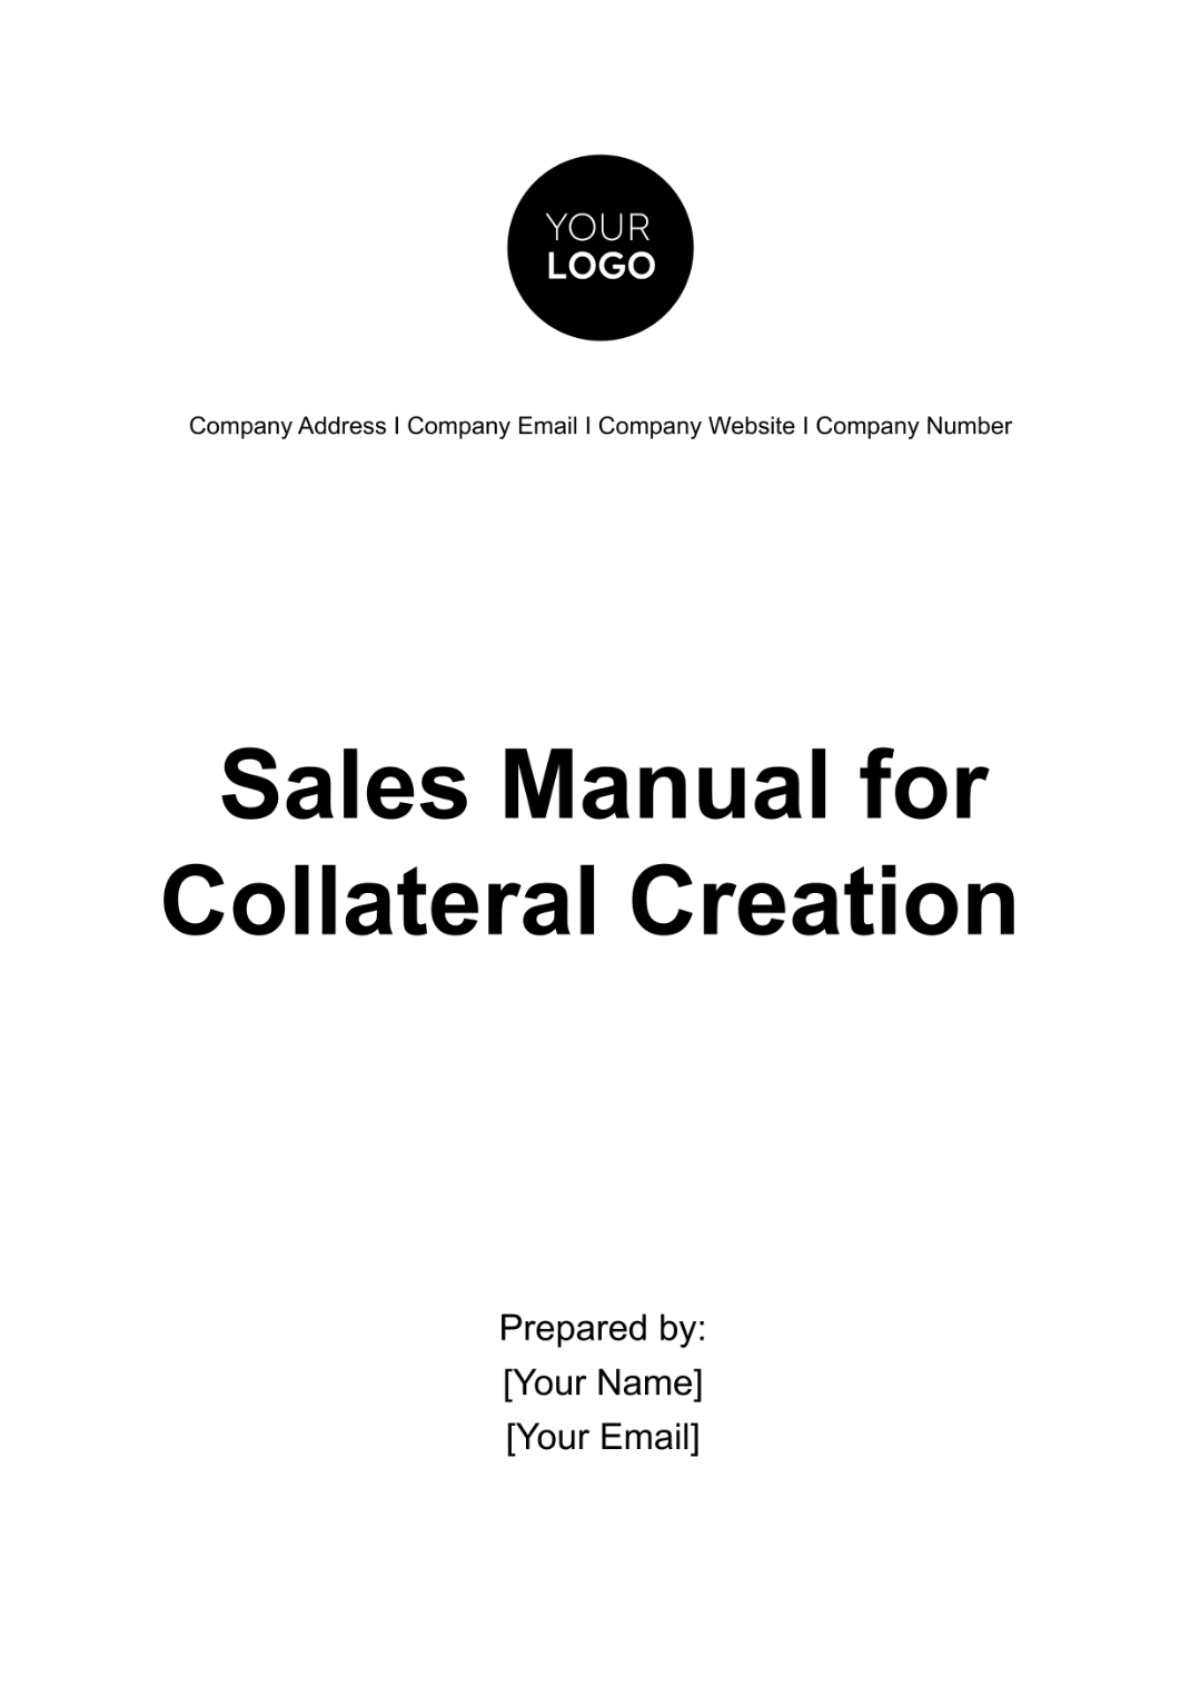 Free Sales Manual for Collateral Creation Template